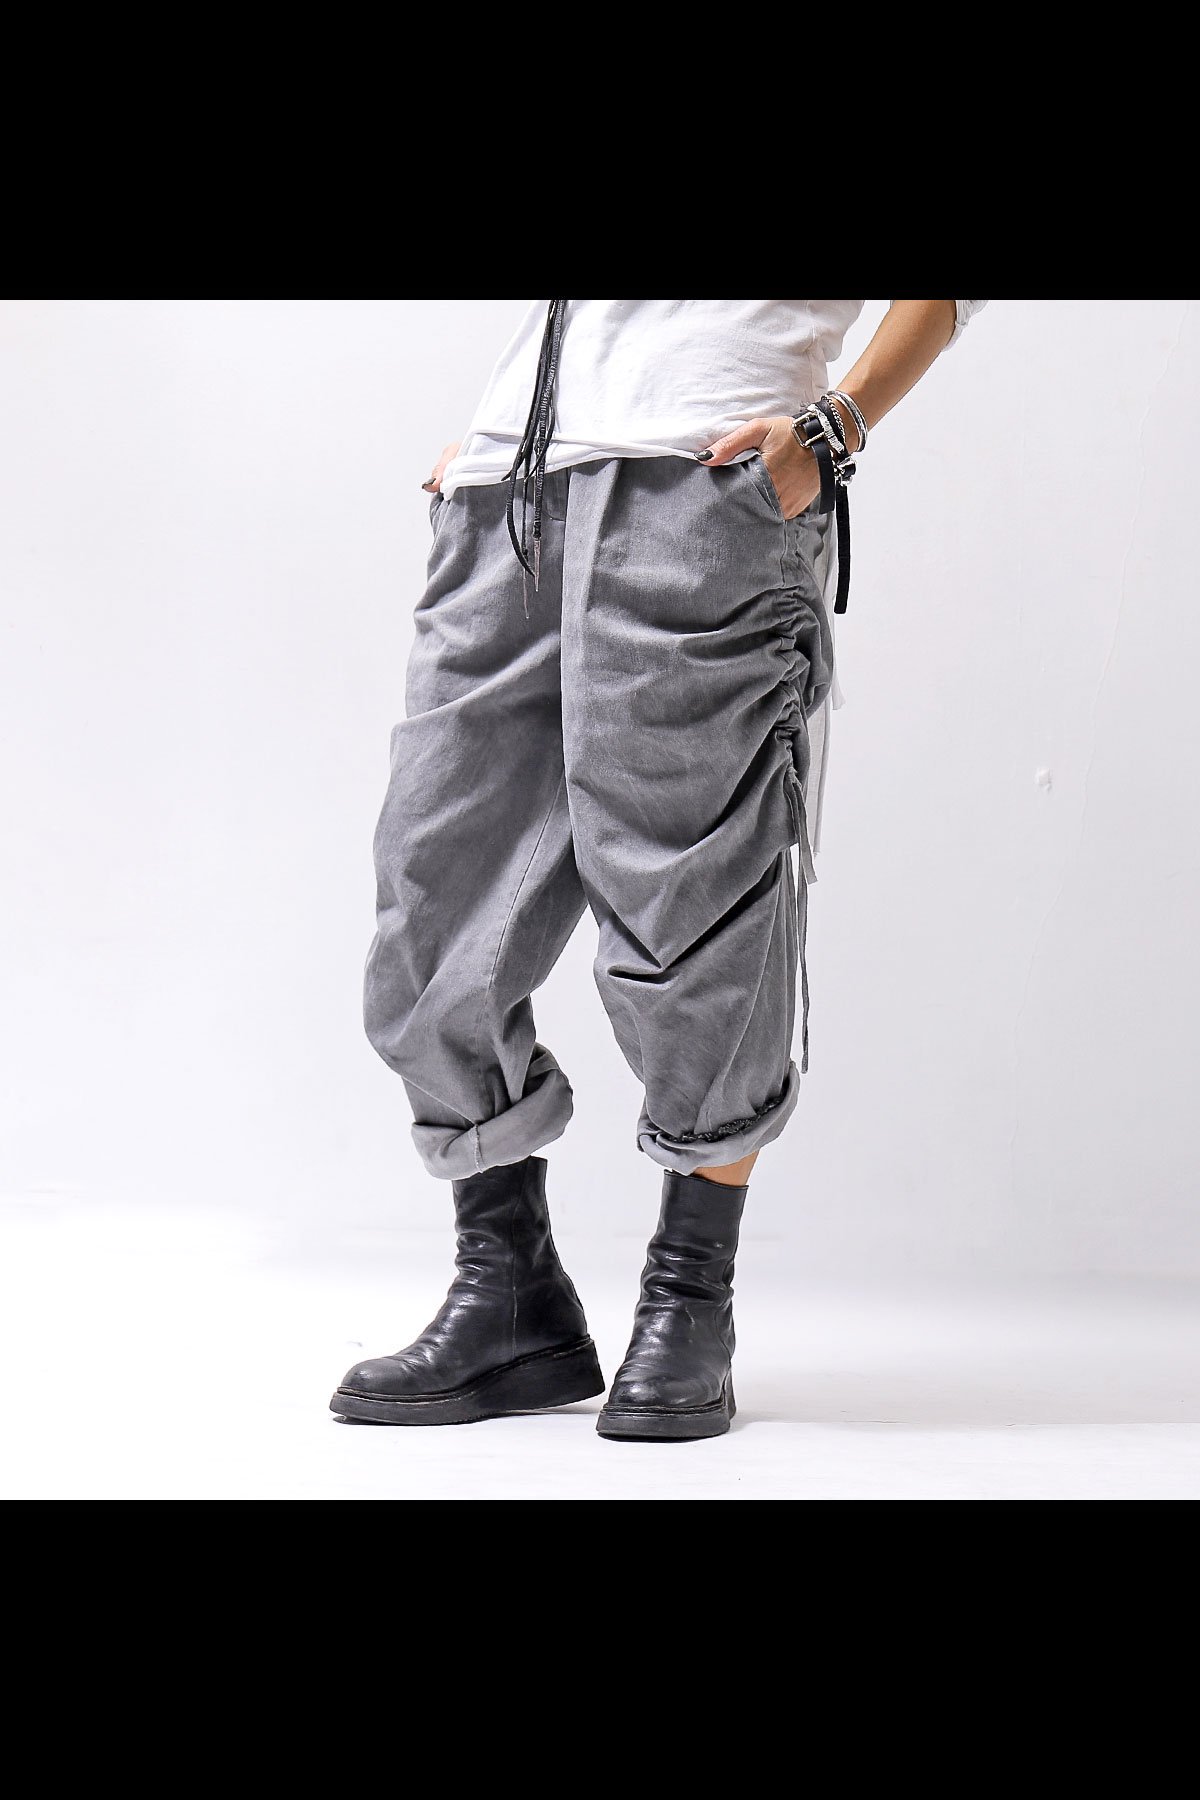 <img class='new_mark_img1' src='https://img.shop-pro.jp/img/new/icons8.gif' style='border:none;display:inline;margin:0px;padding:0px;width:auto;' />UNISEX SIDE STRING CODE PANTS 319/MM_GREY STORM